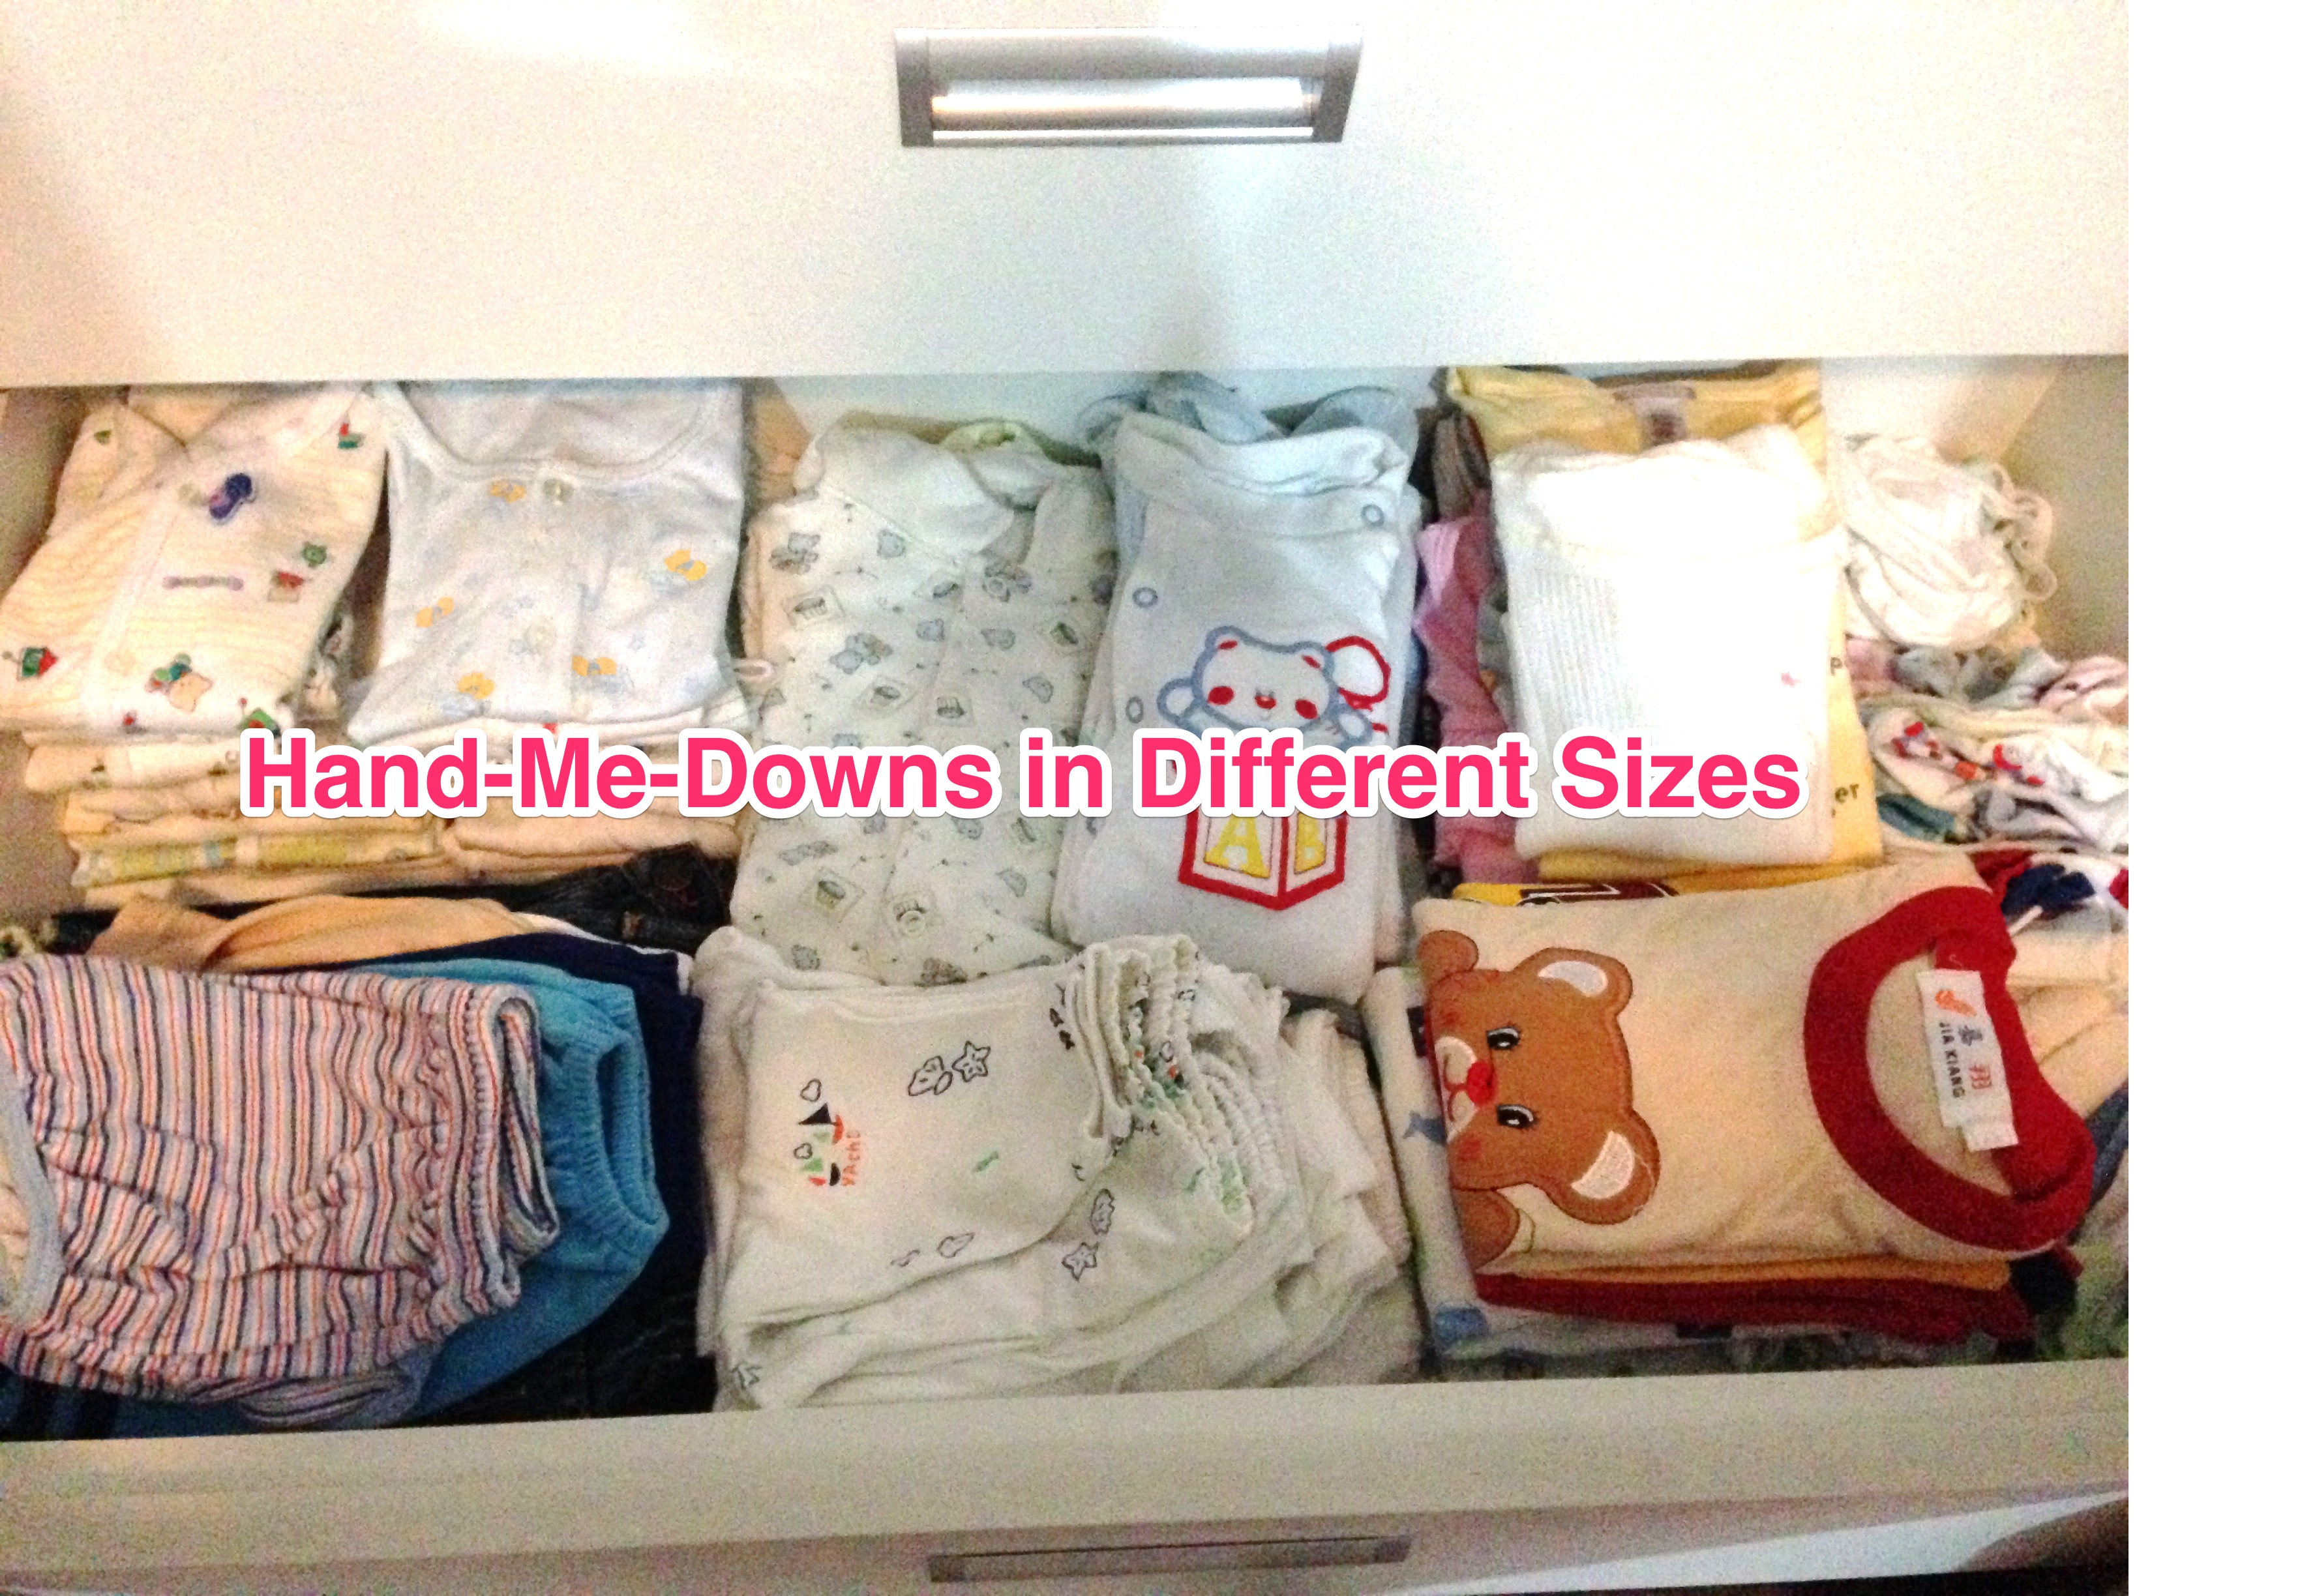 Baby clothes in different sizes